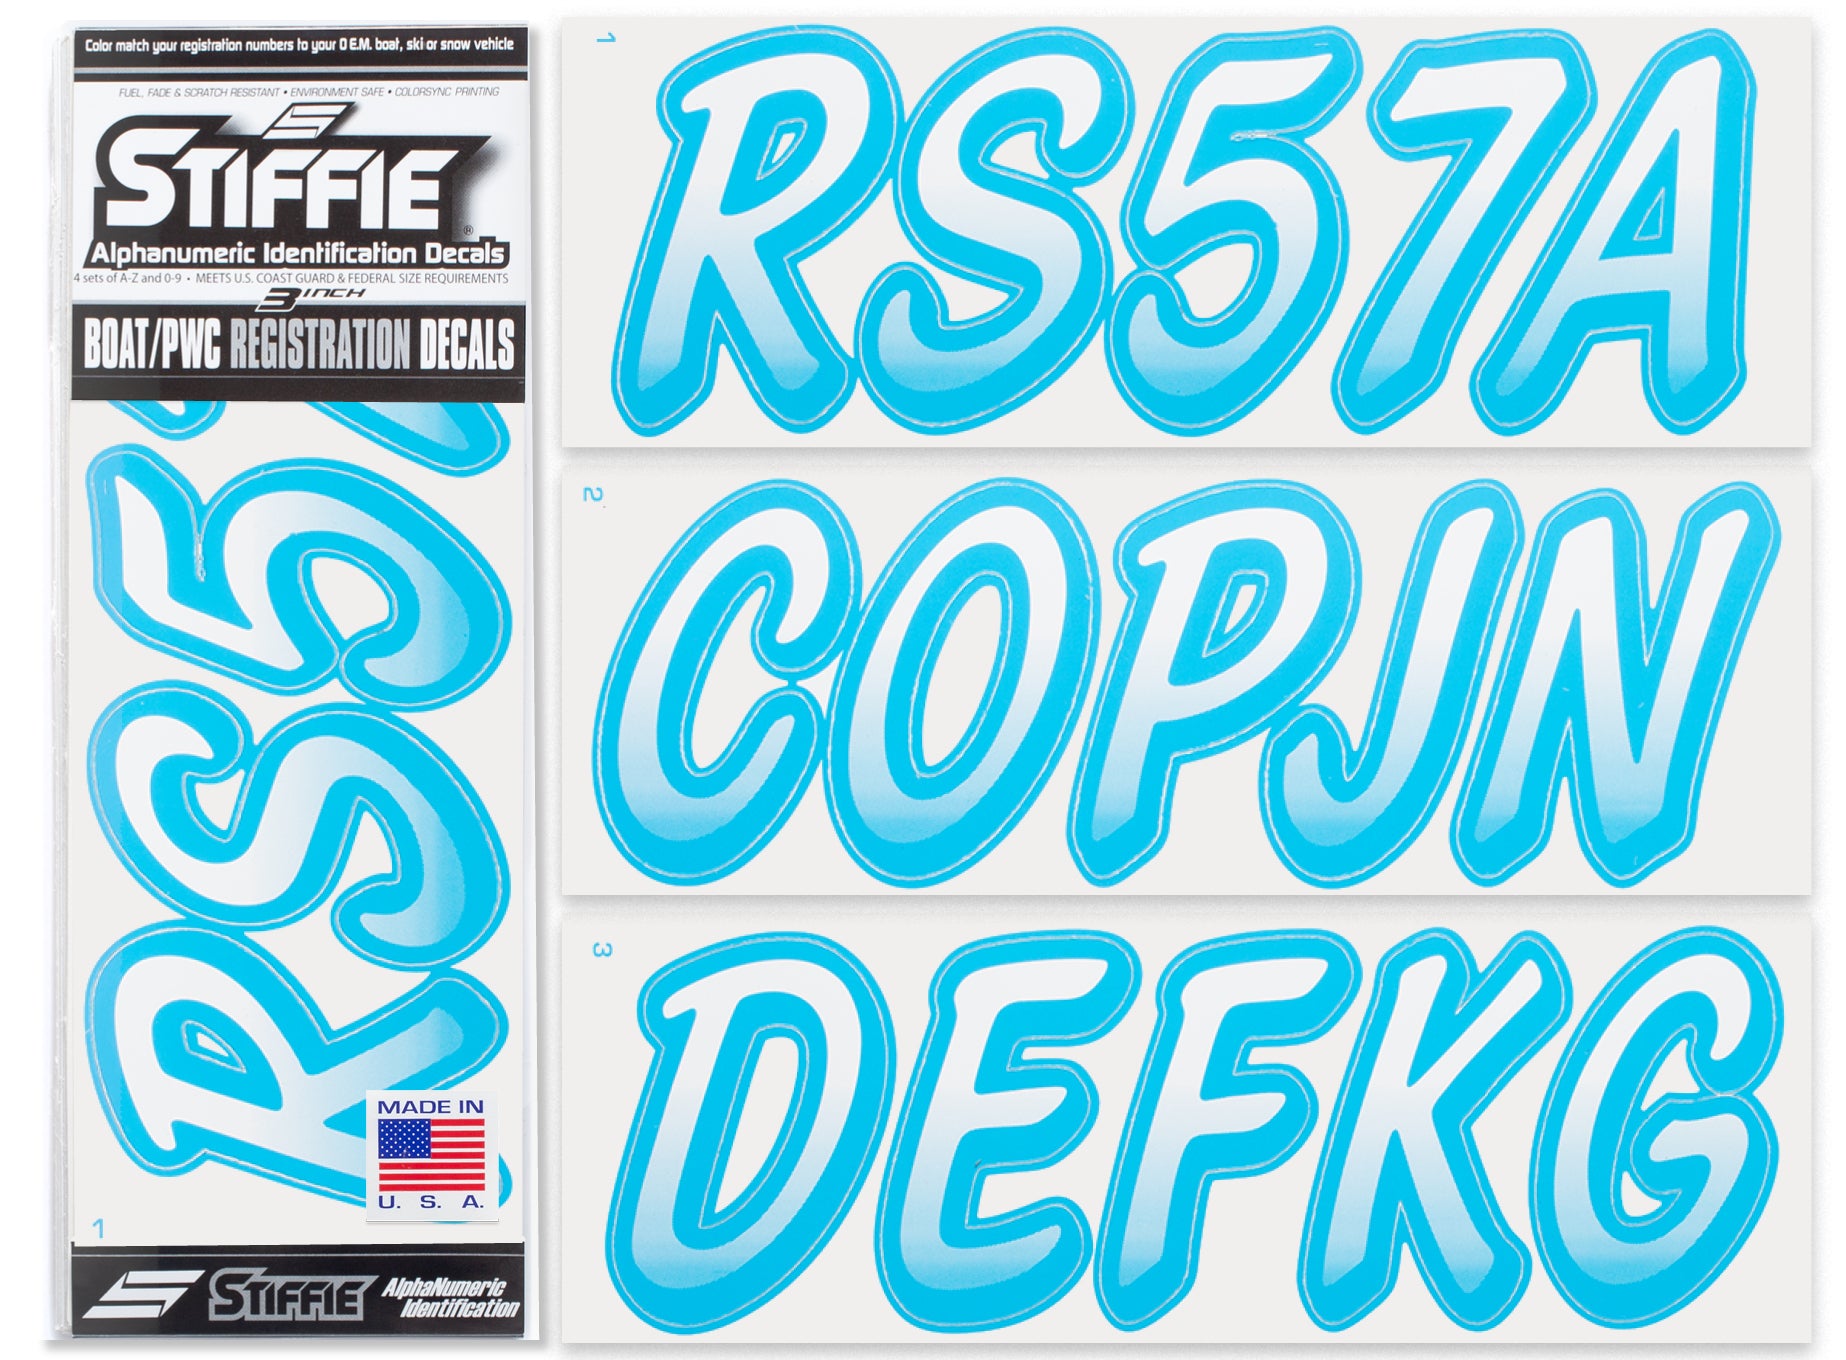 STIFFIE Whipline White/Sky Blue 3" Alpha-Numeric Registration Identification Numbers Stickers Decals for Boats & Personal Watercraft